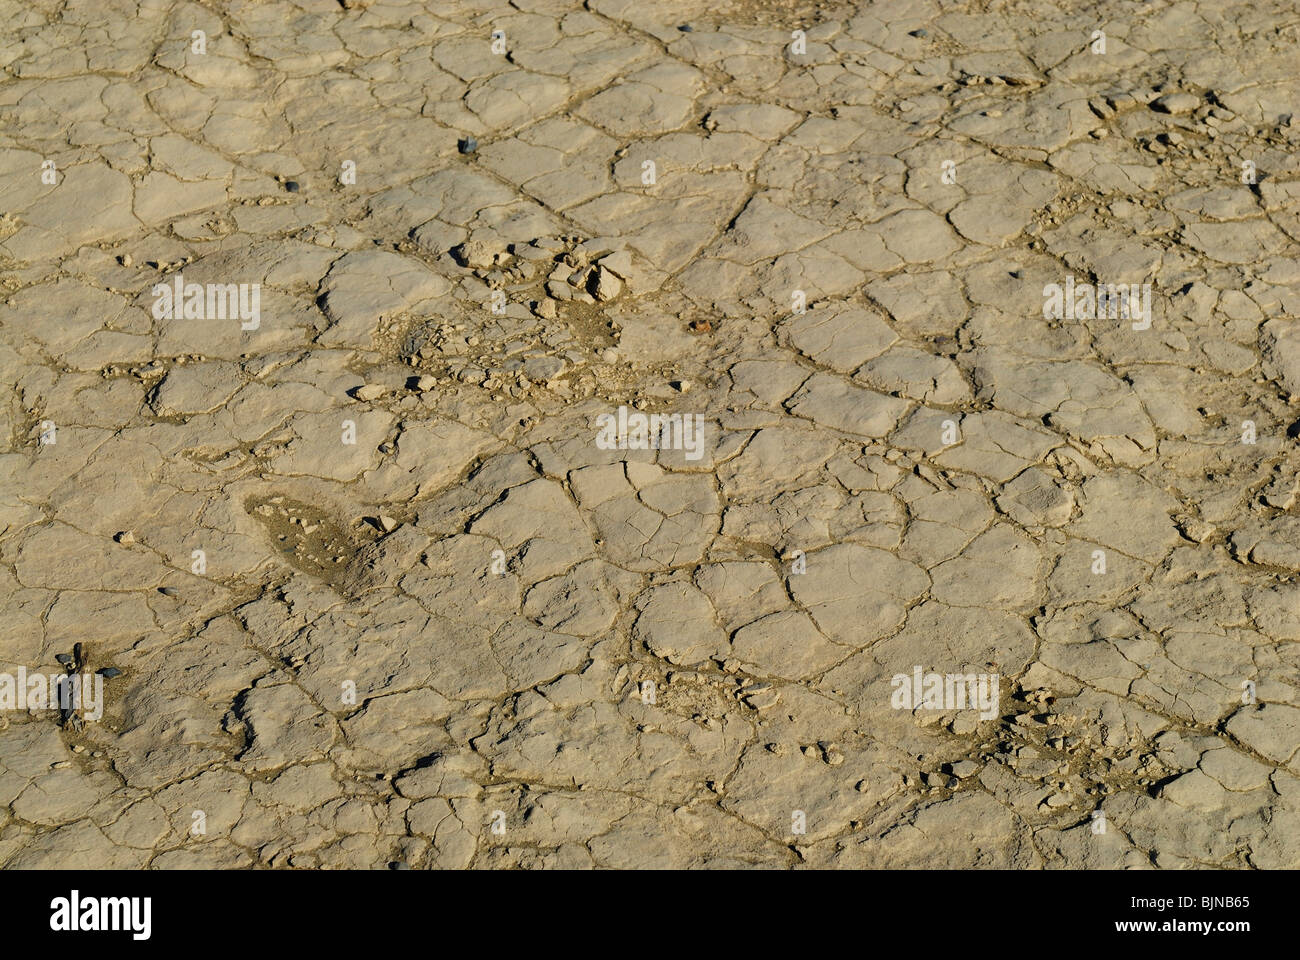 Dry soil in Mesquite sand Dunes in Death Valley, California state Stock Photo